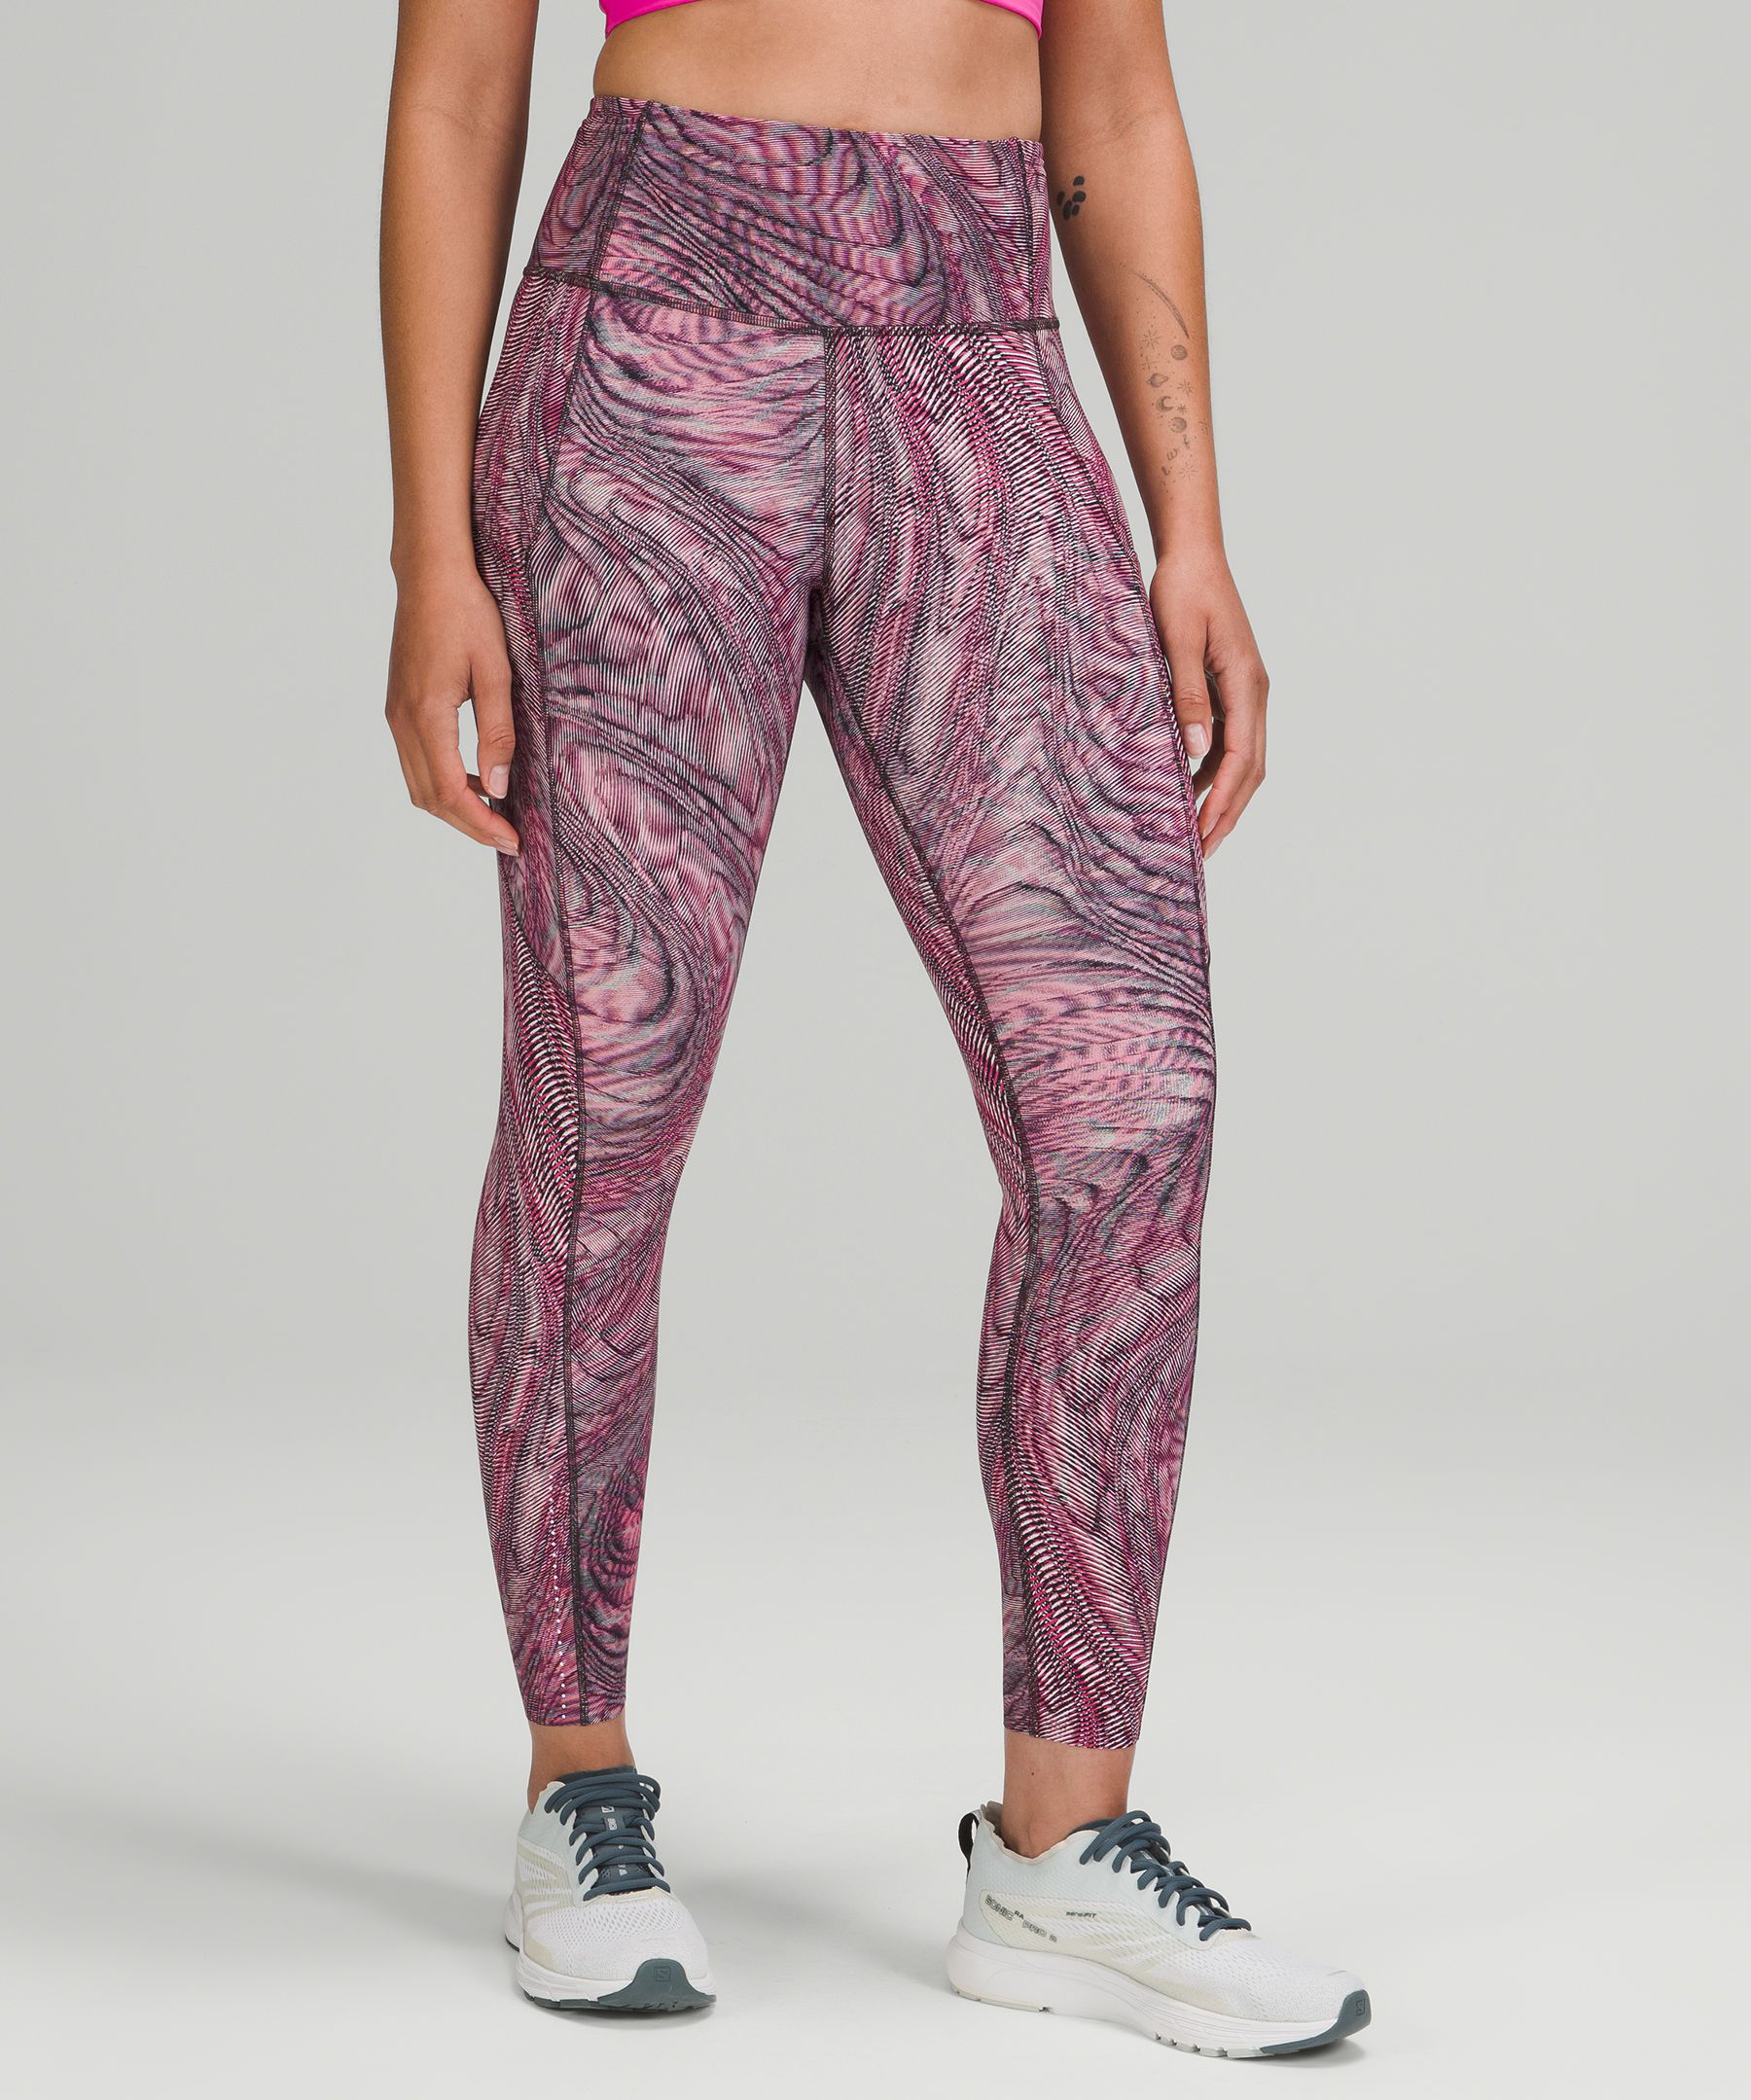 lululemon - Fast and Free High-Rise Tight 25 Reflective on